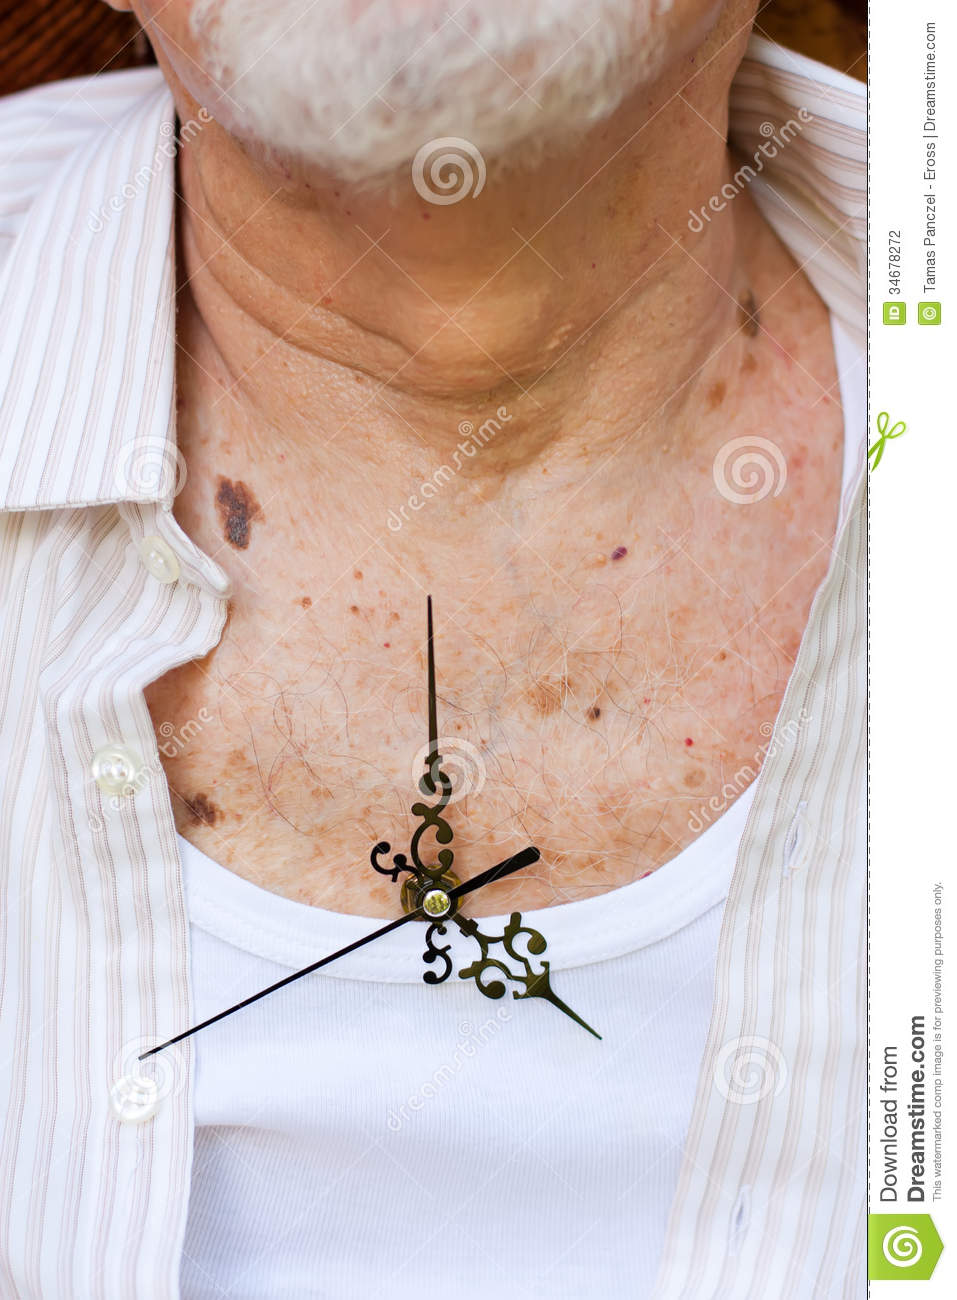 Clock Hands Placed On An Elderly Man S Chest 